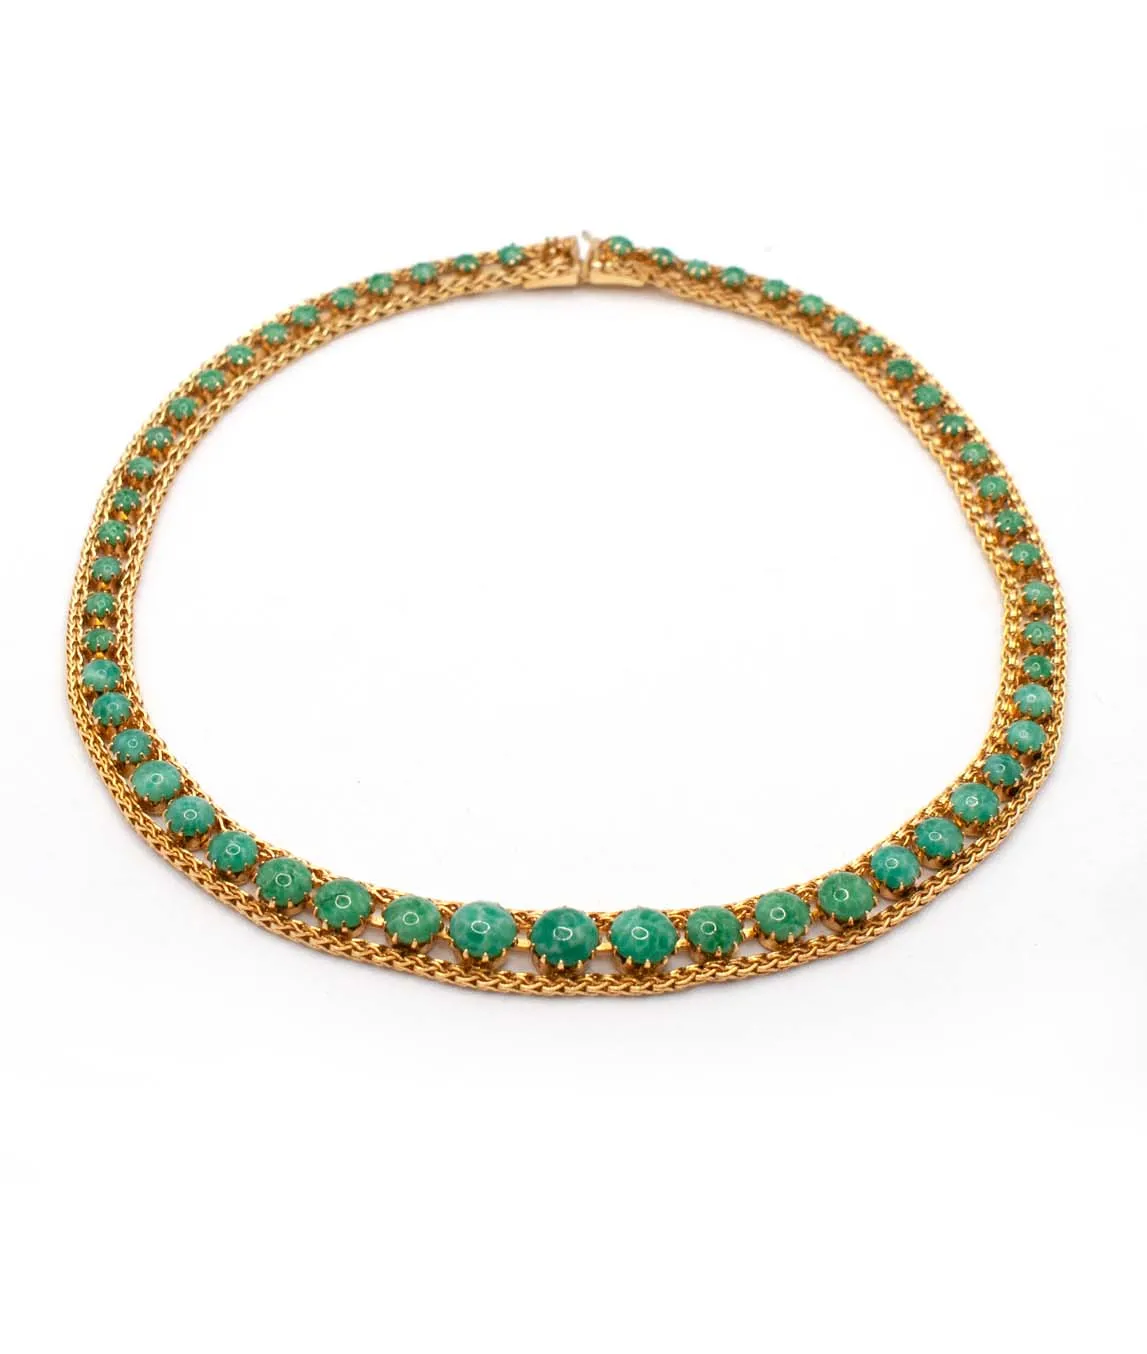 Vintage choker necklace by Christian Dior decorated with gold plated metal and round green glass stones - profile view